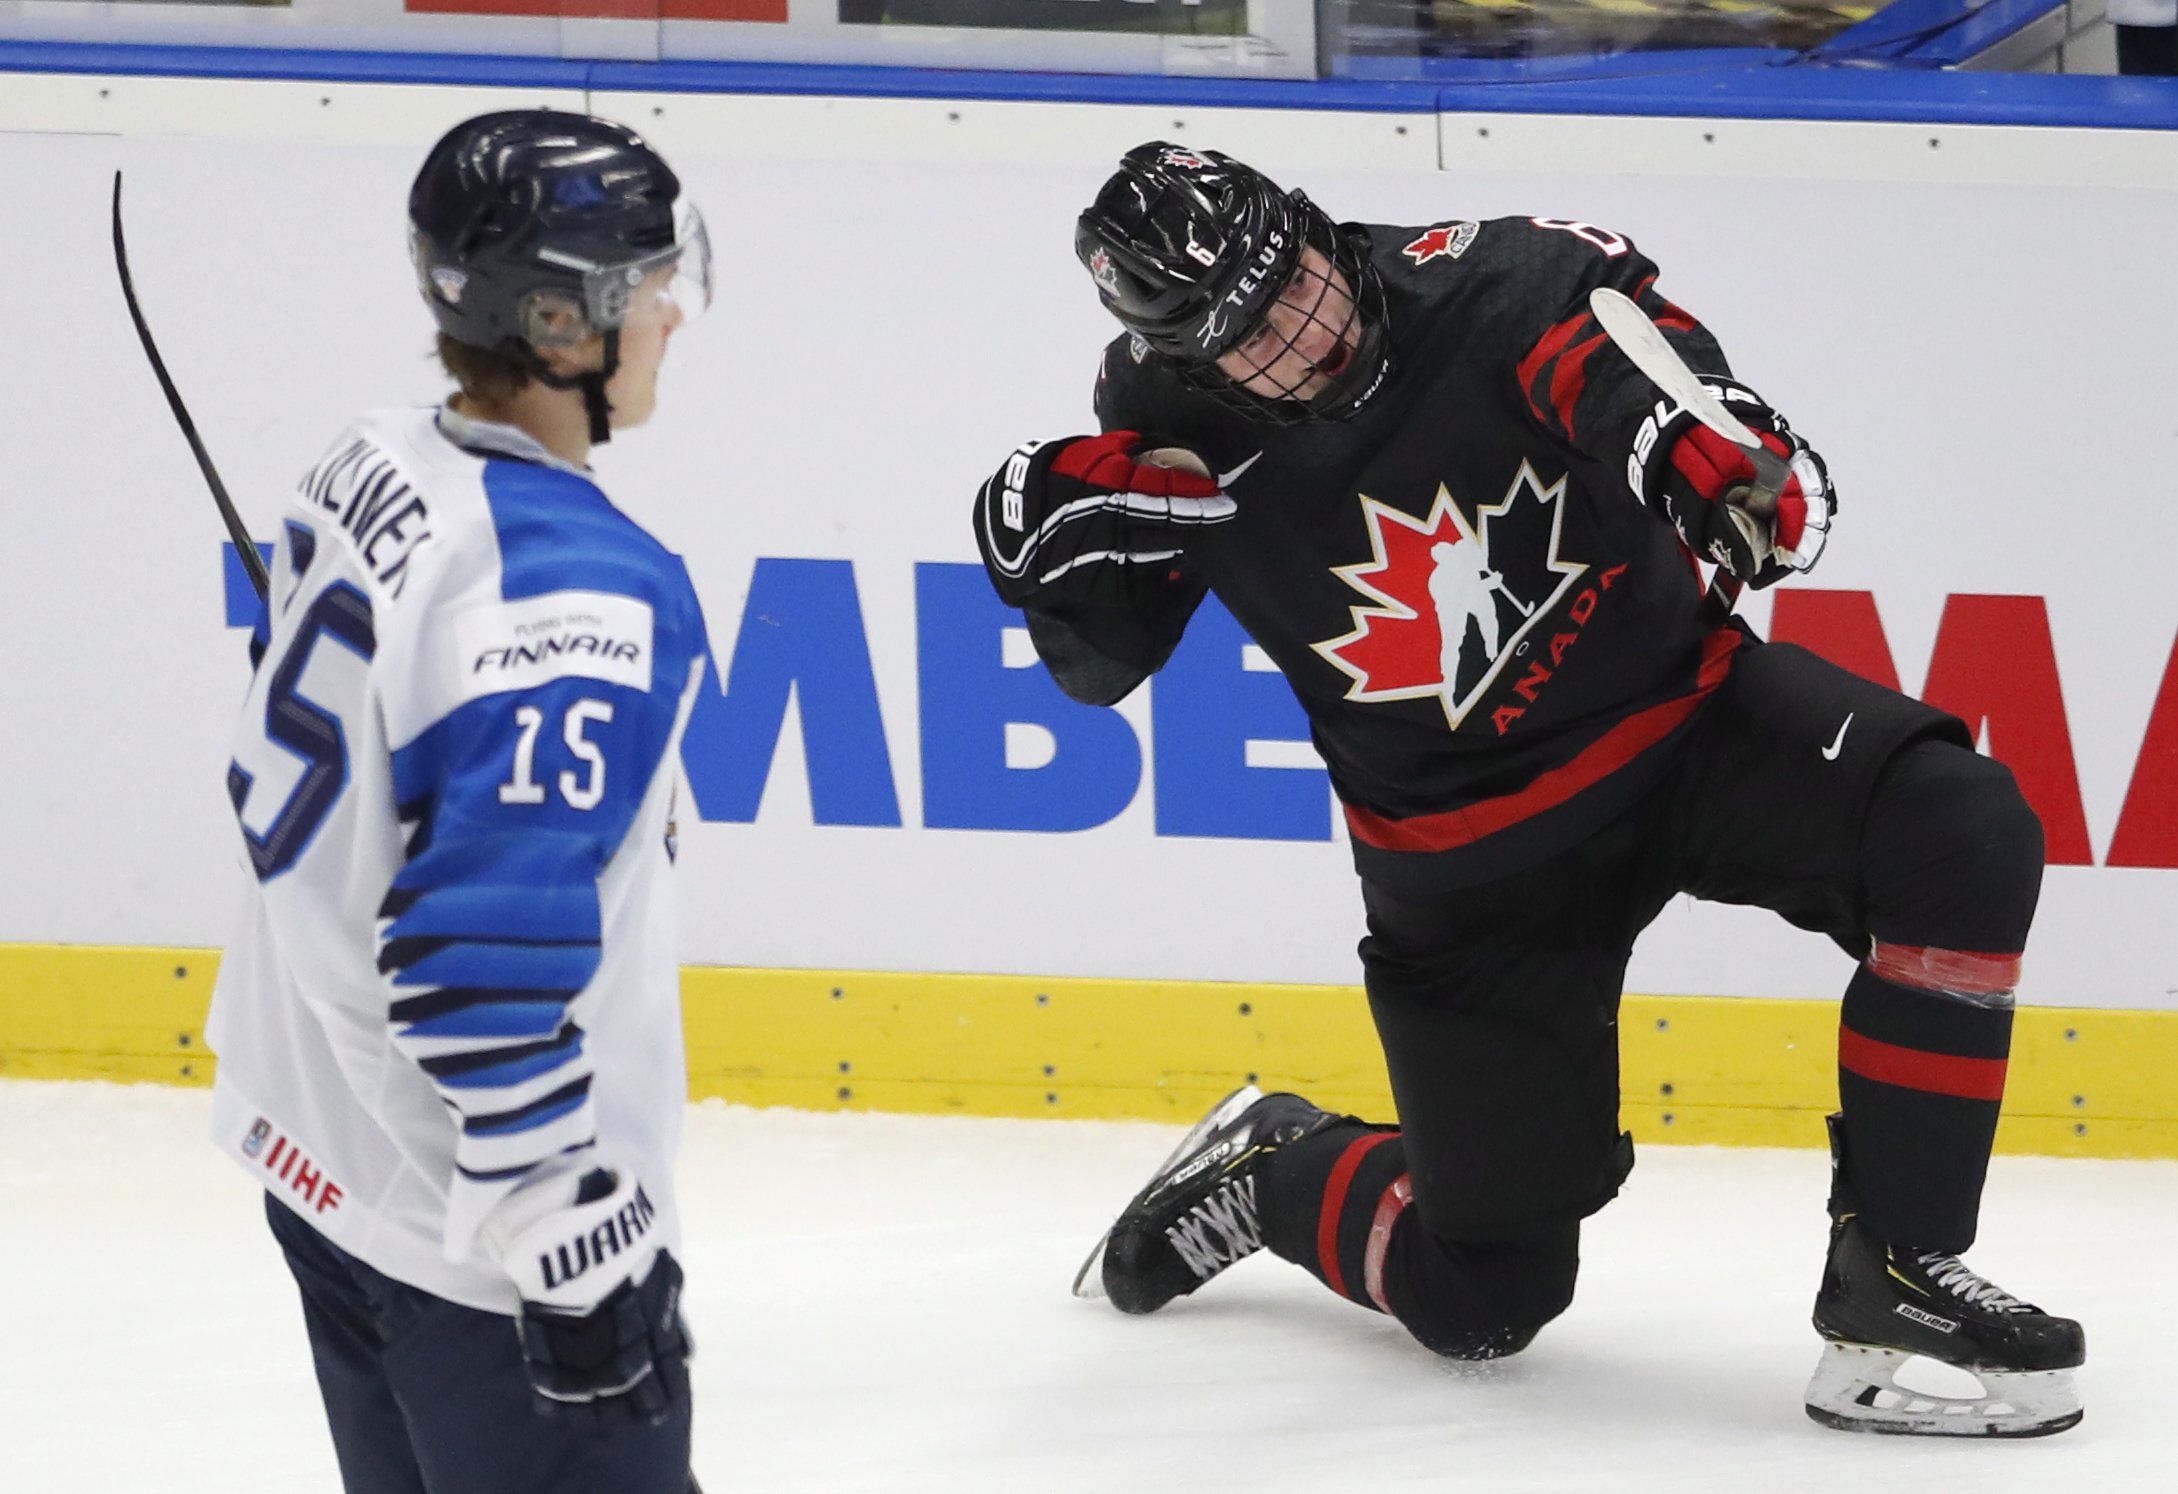 Finland's Lenni Killinen, left, skates past as Canada's Jamie Drysdale, right, celebrates after scoring his sides third goal during the U20 Ice Hockey Worlds semifinal match between Finland and Canada in Ostrava, Czech Republic, Saturday, Jan. 4, 2020. (AP Photo/Petr David Josek)